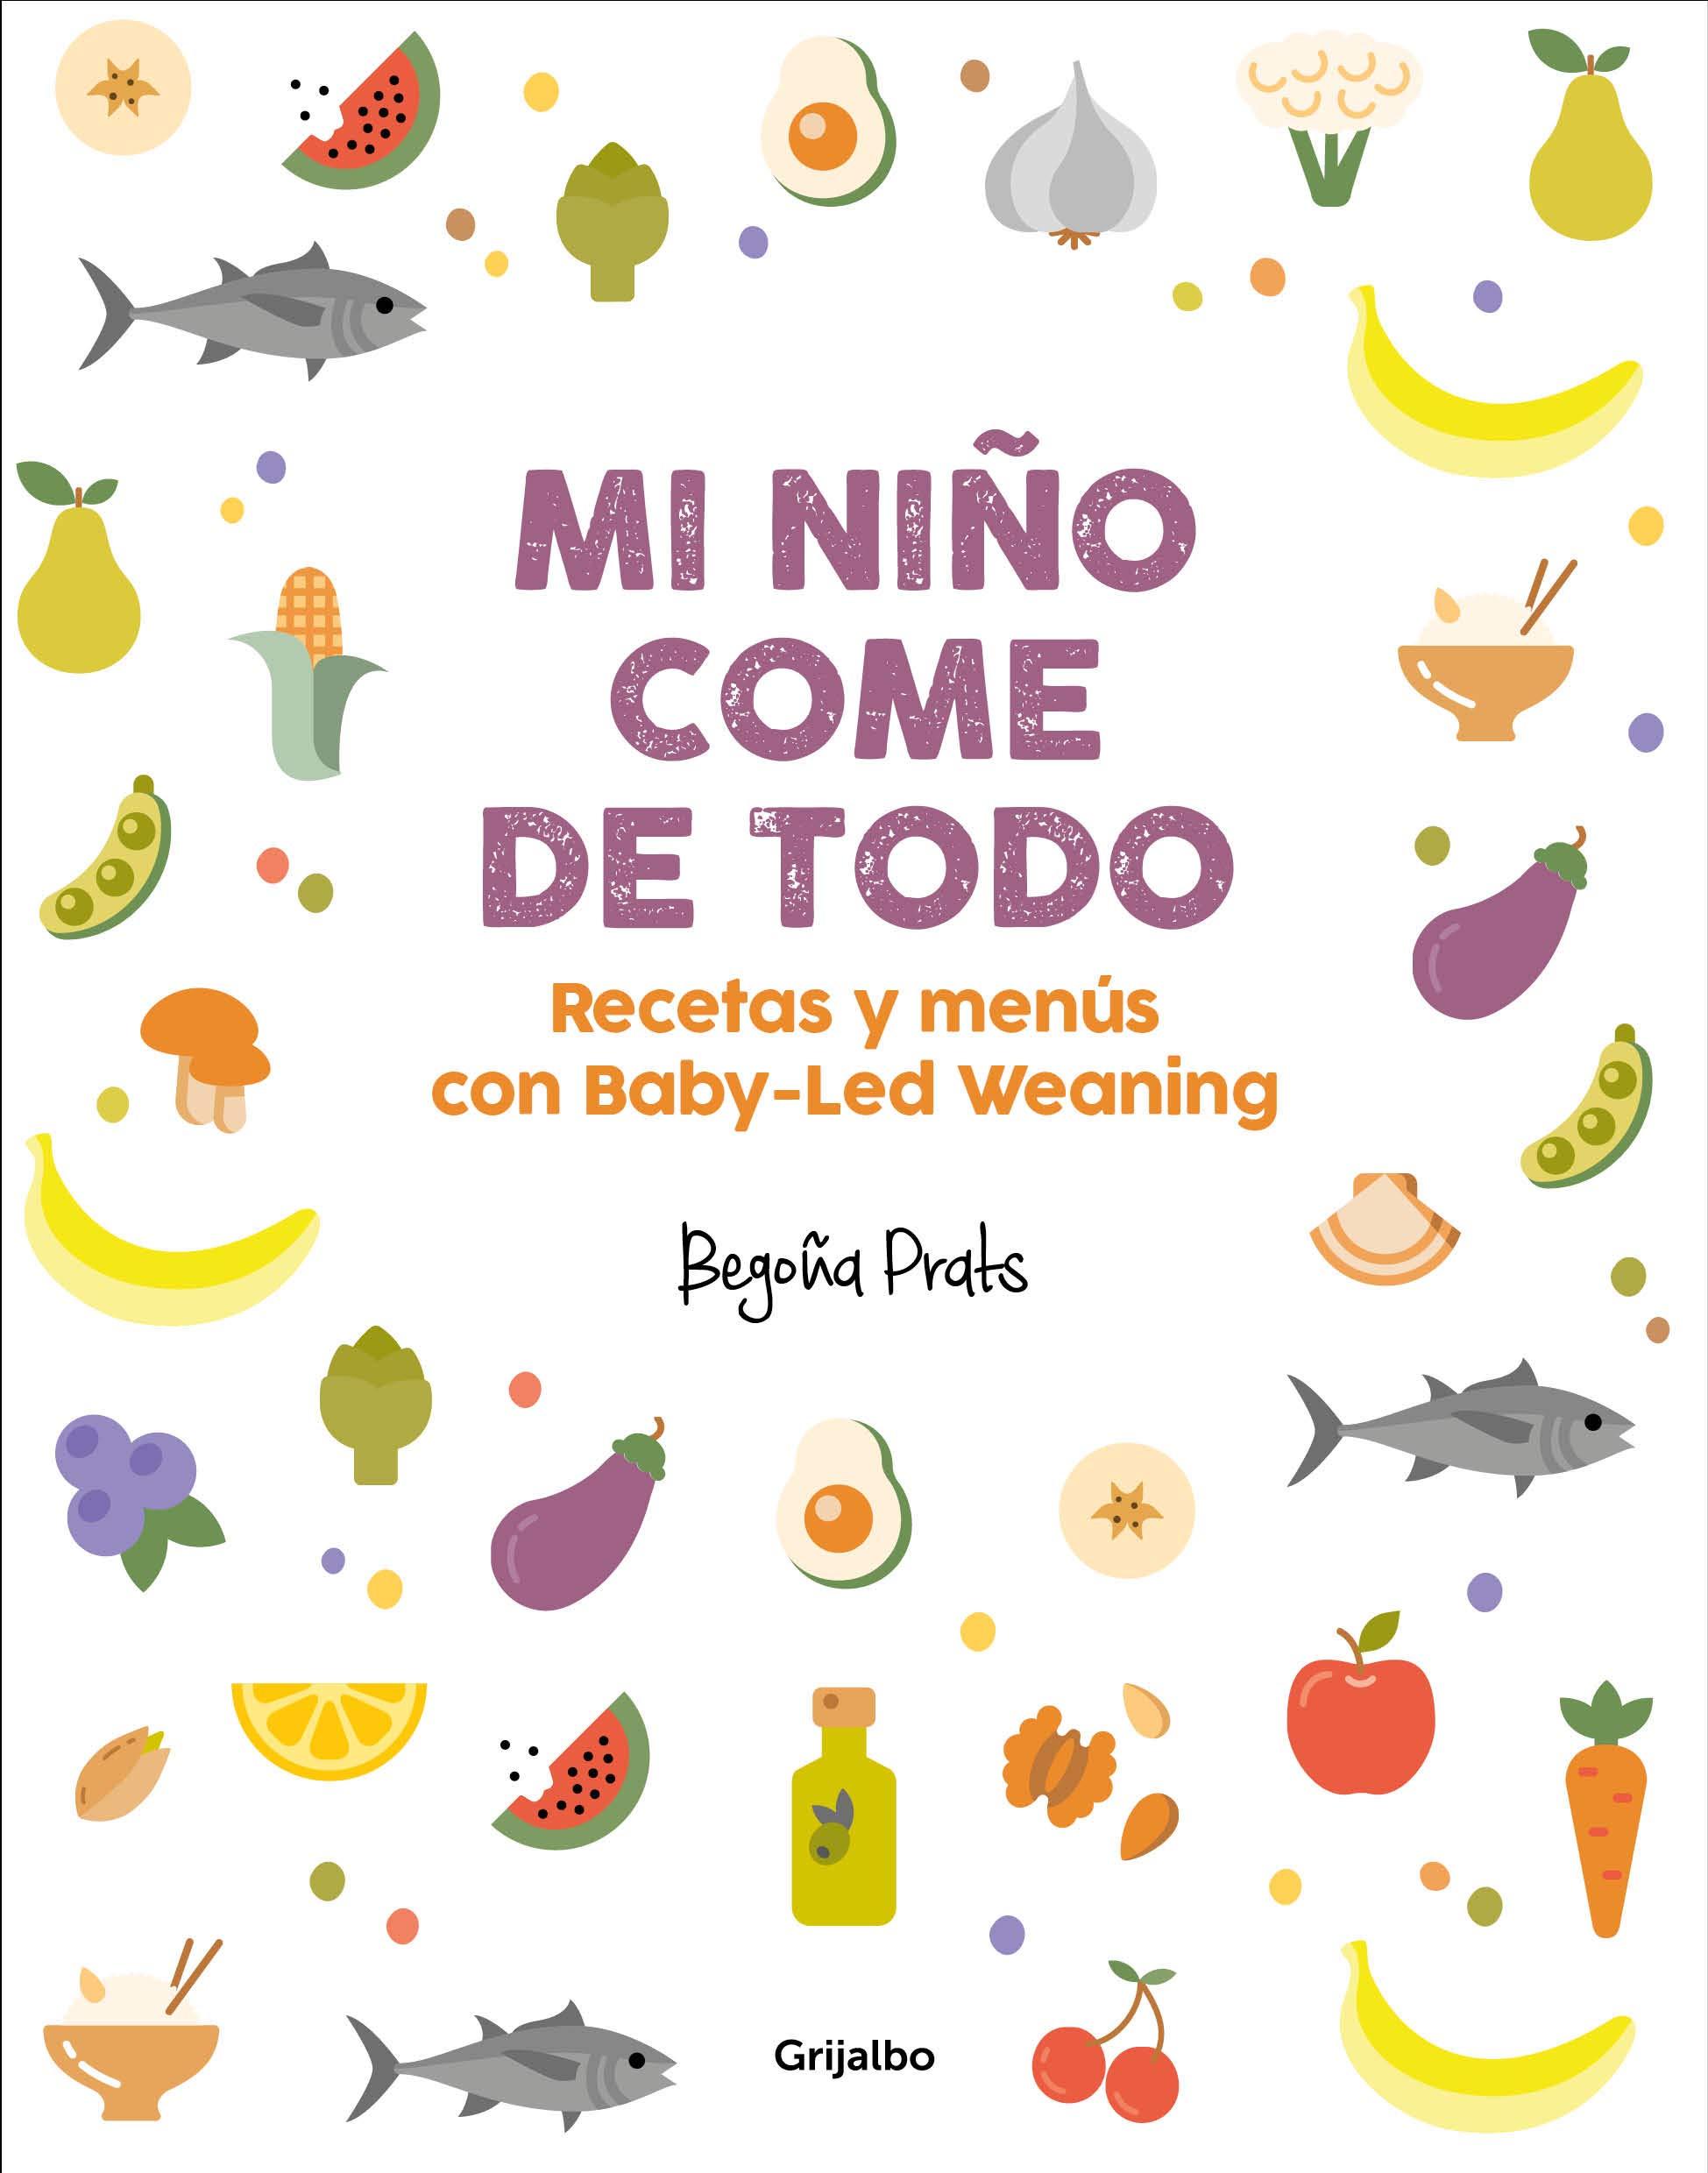 Mi niño come de todo (Todo lo que tienes que saber sobre Baby-led Weaning) / My Child Eats Everything (All You Need to Know About Baby-Led Weaning) (Spanish Edition)